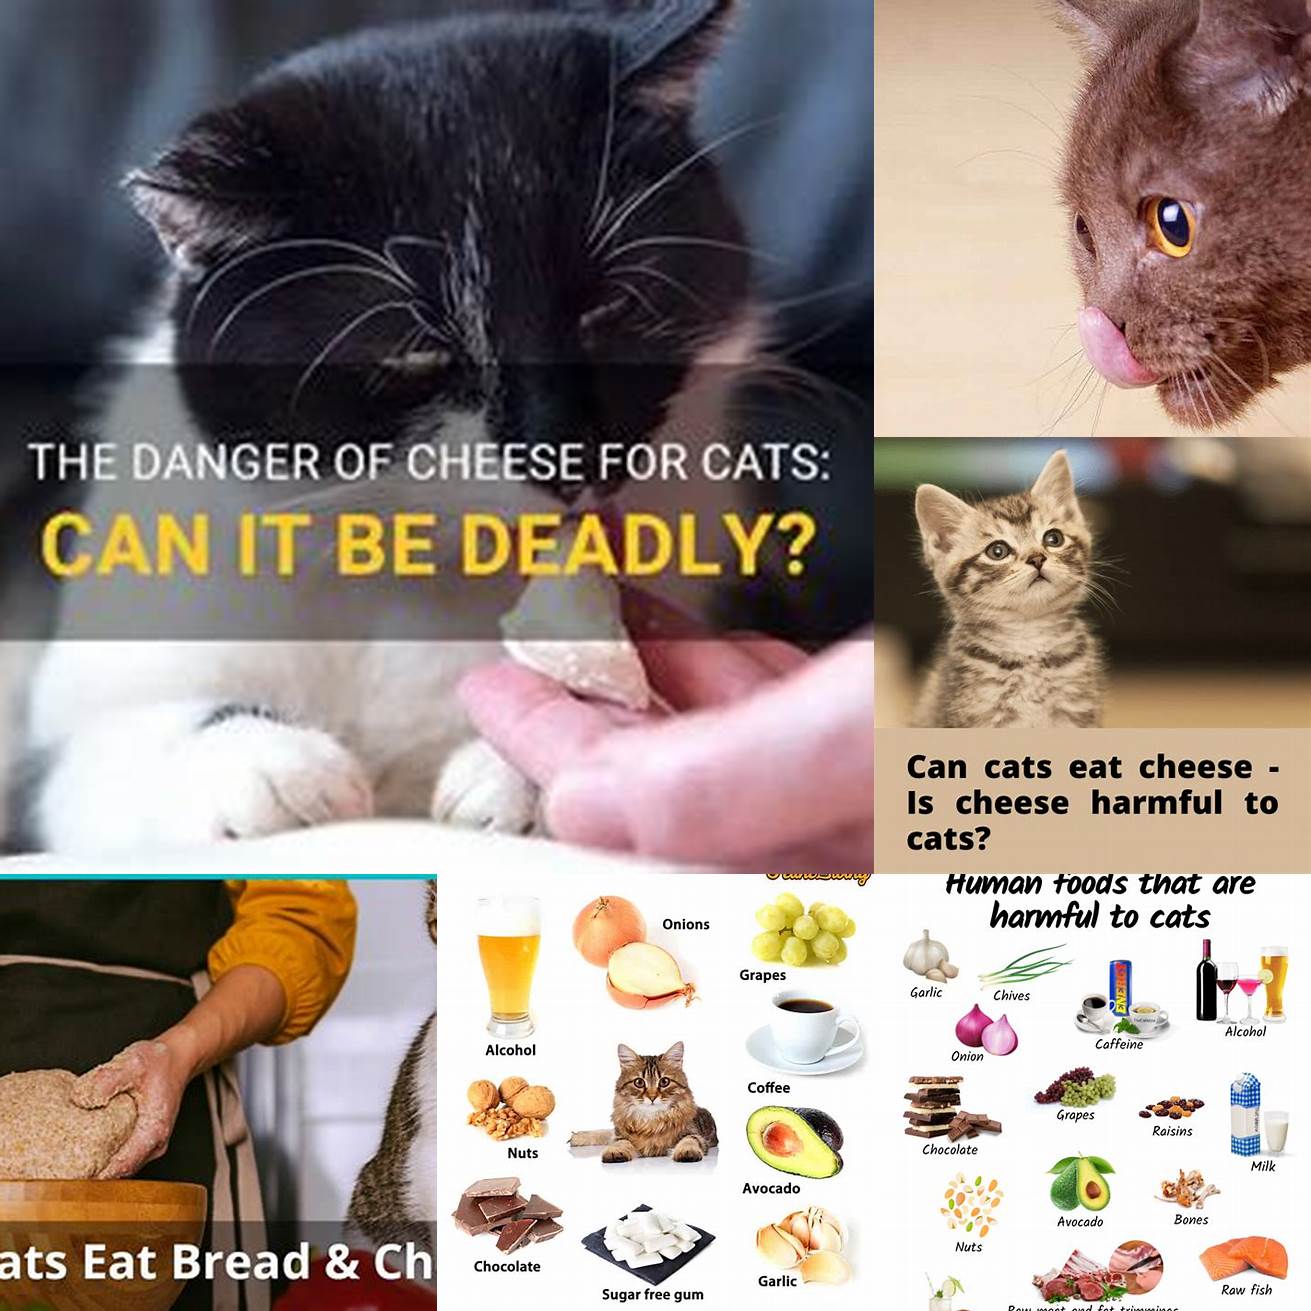 Cheese can be harmful to cats